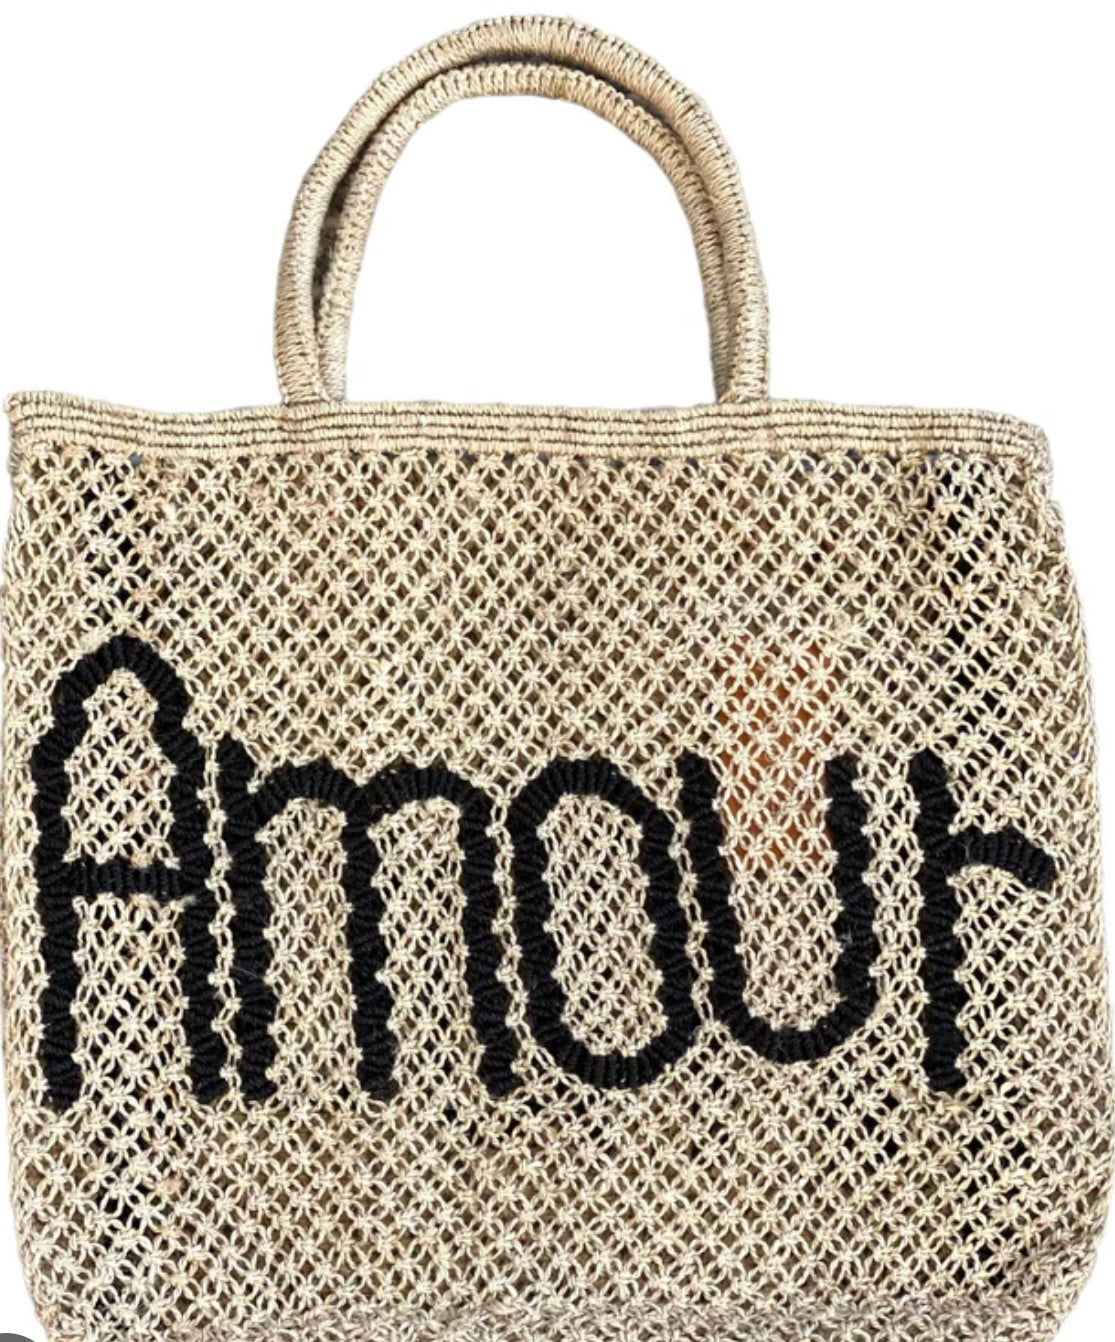 Basket Bag AMOUR Natural With Black Writing